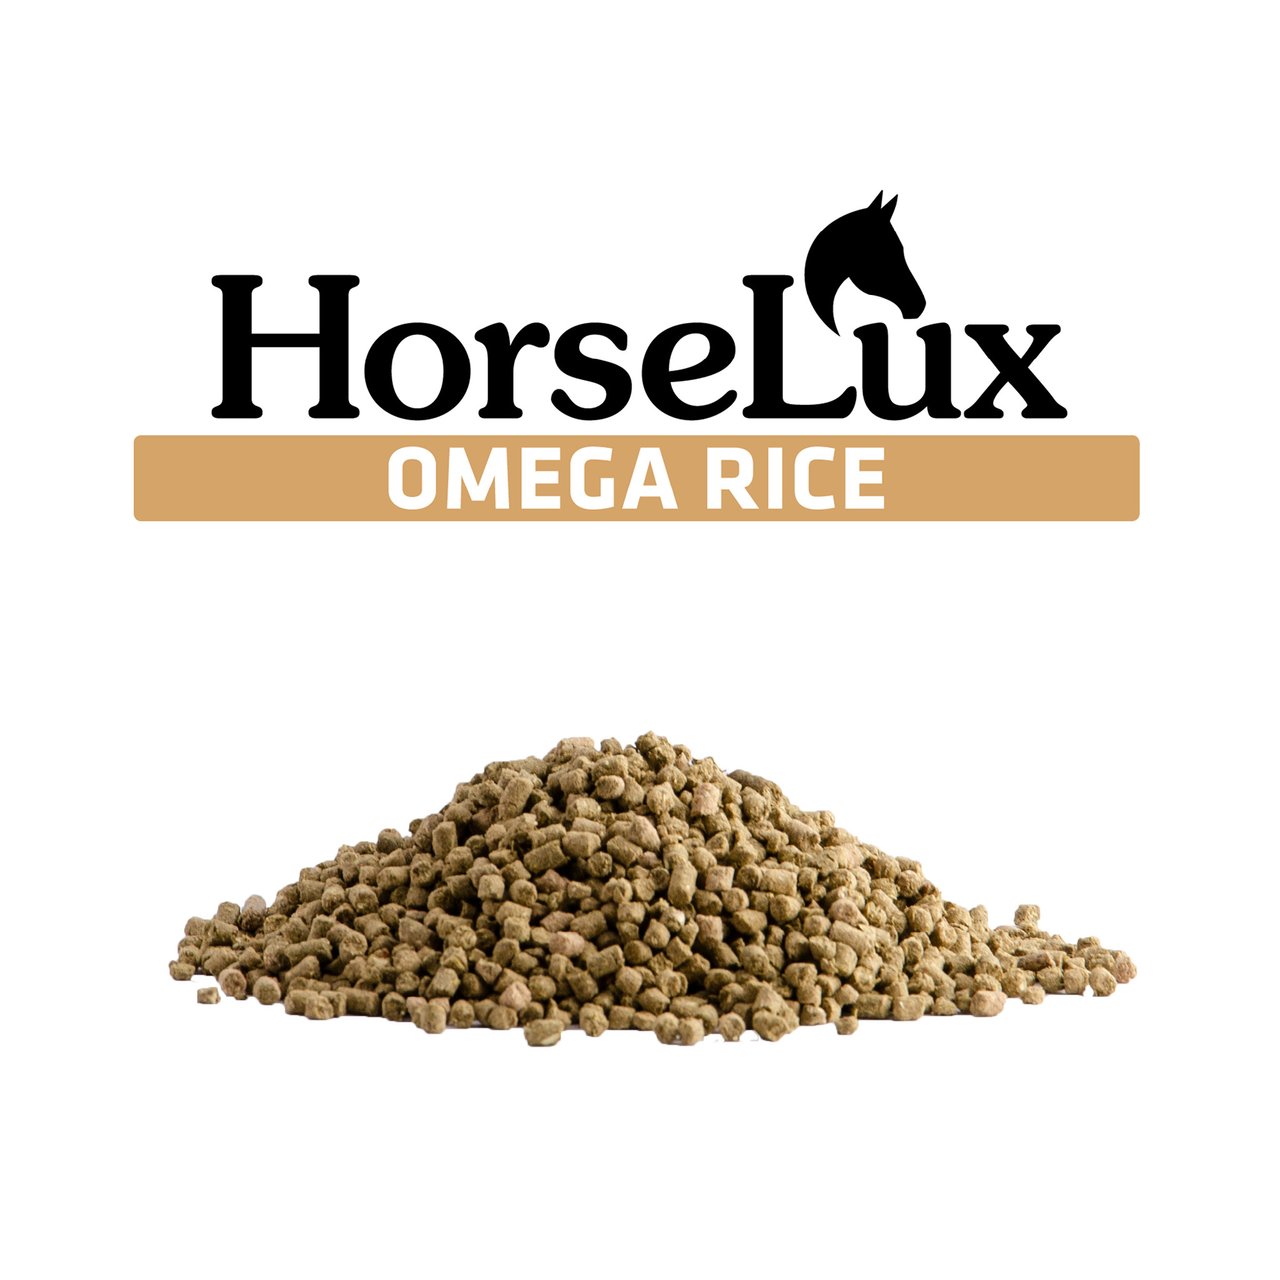 Horselux Omega Rice